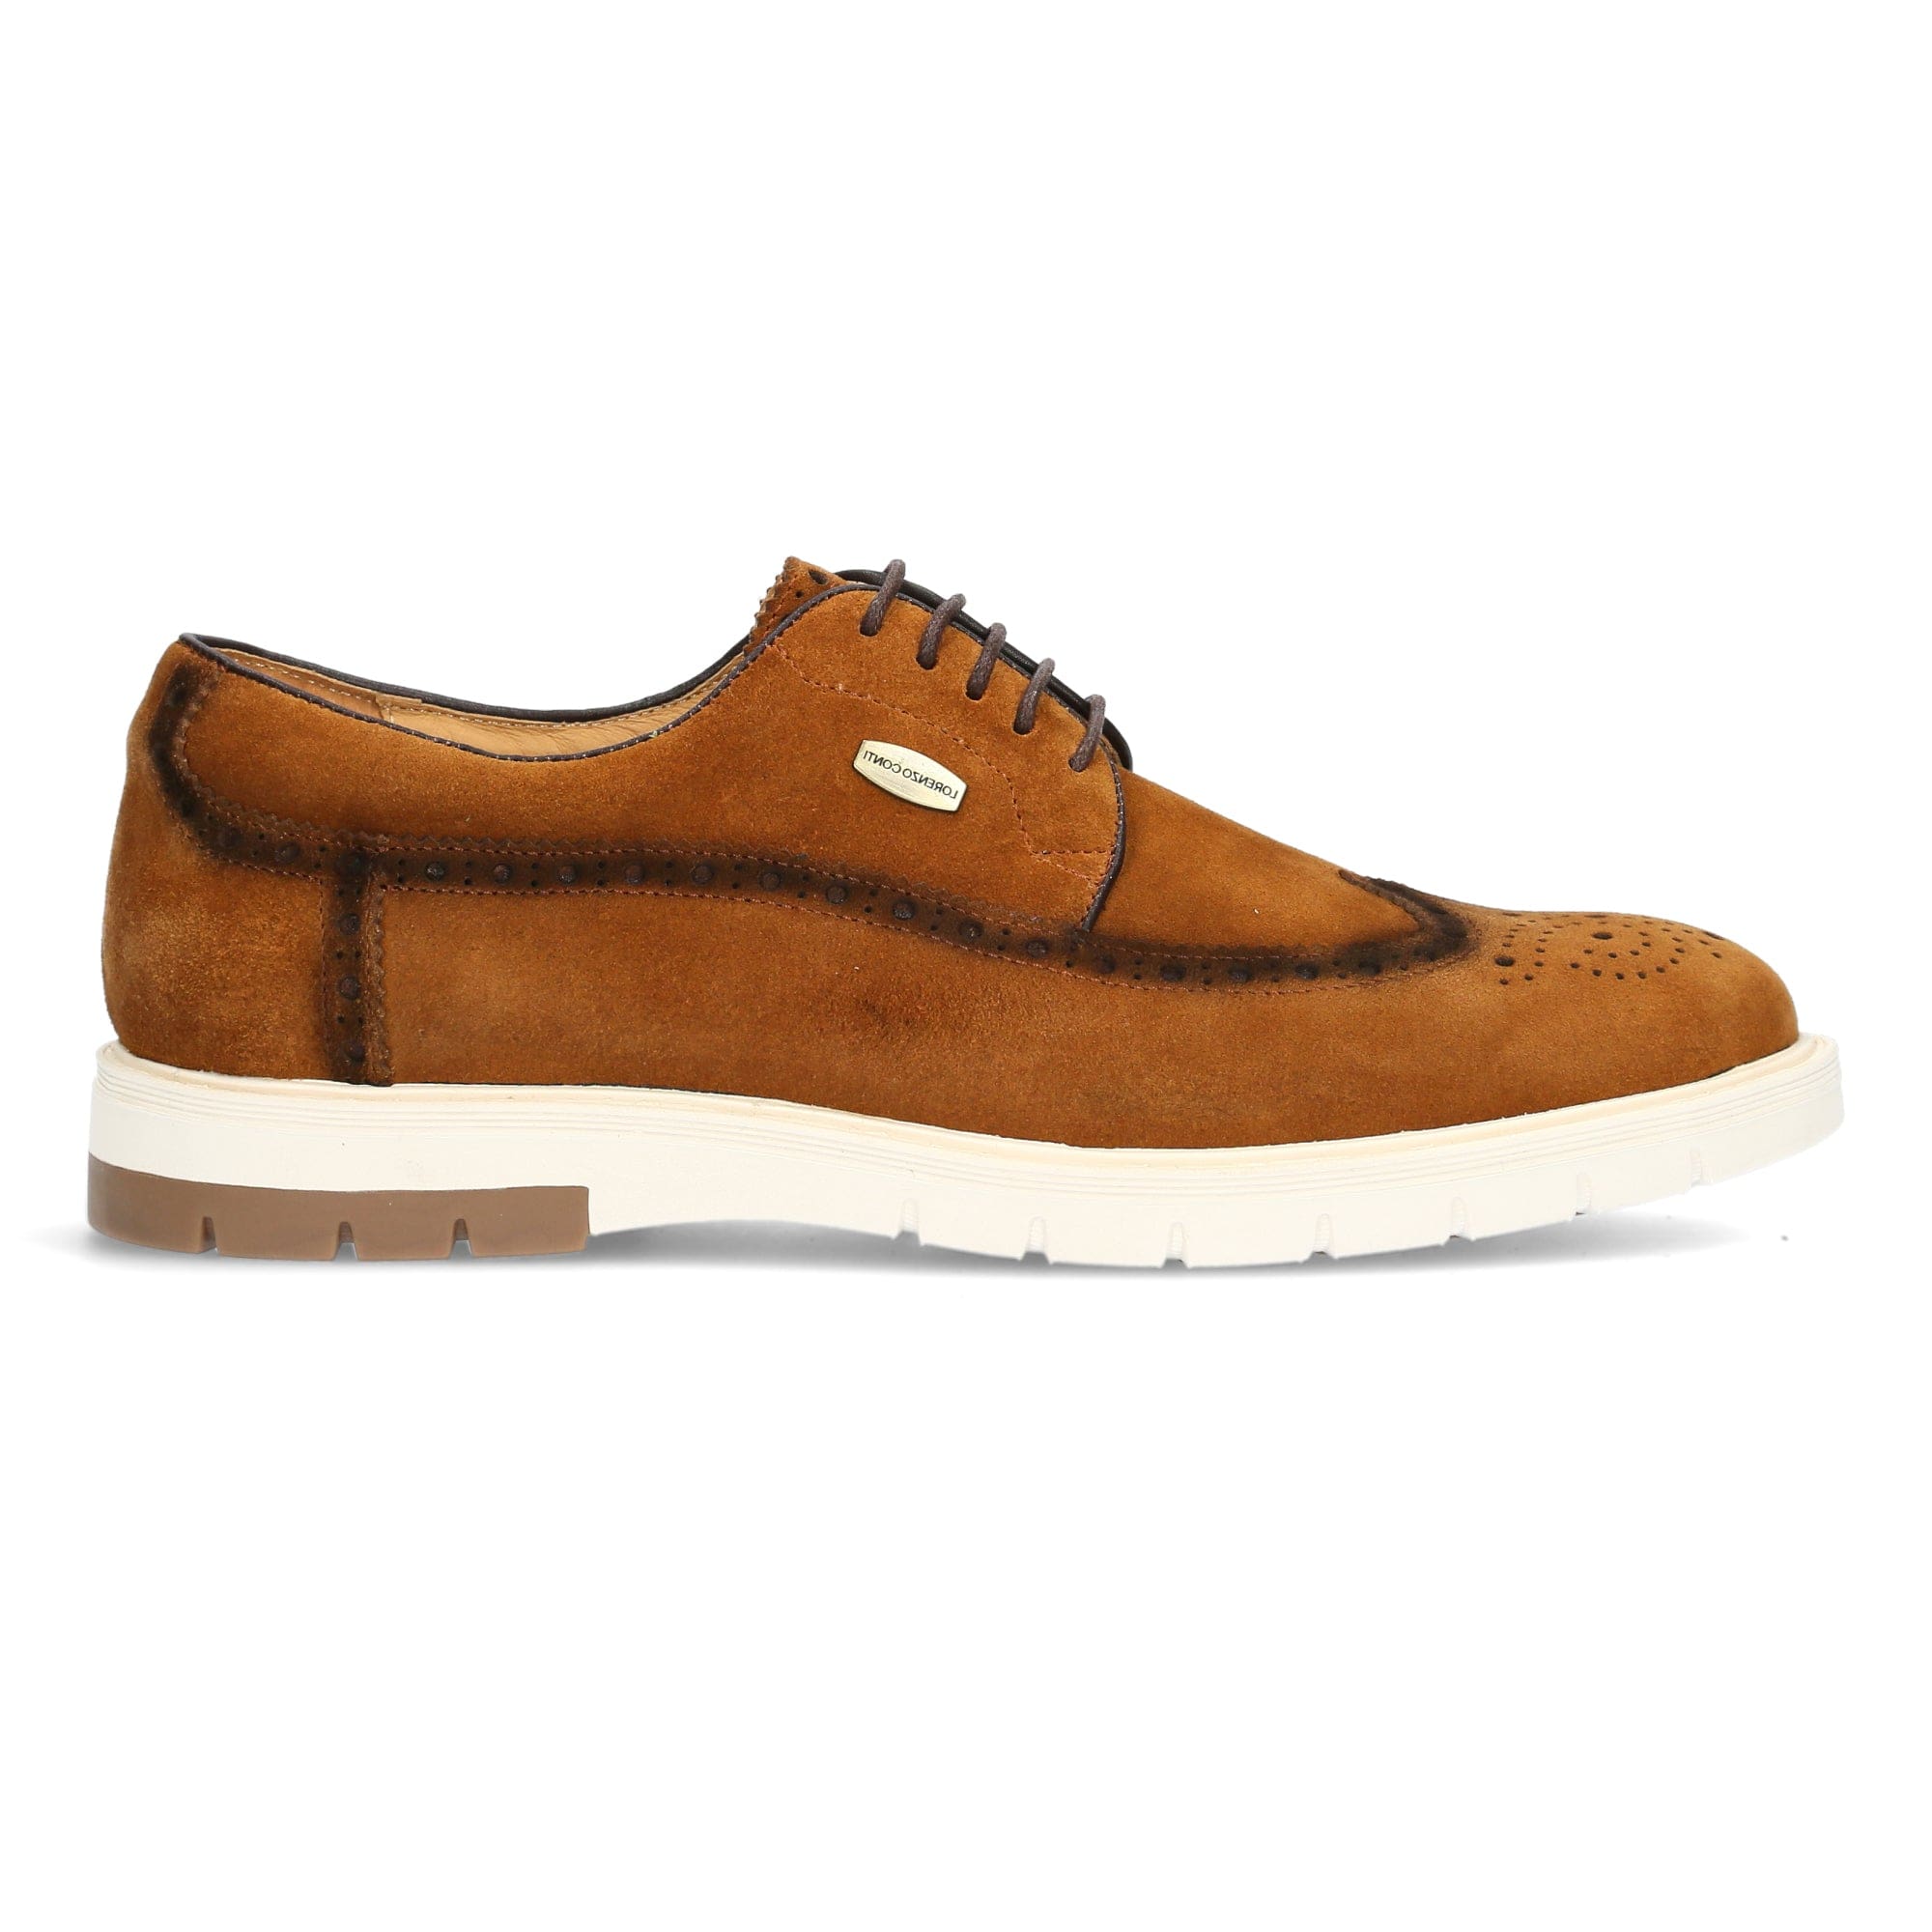 Chaussure Homme ARNO 01 - 40 / Brun - Soulier